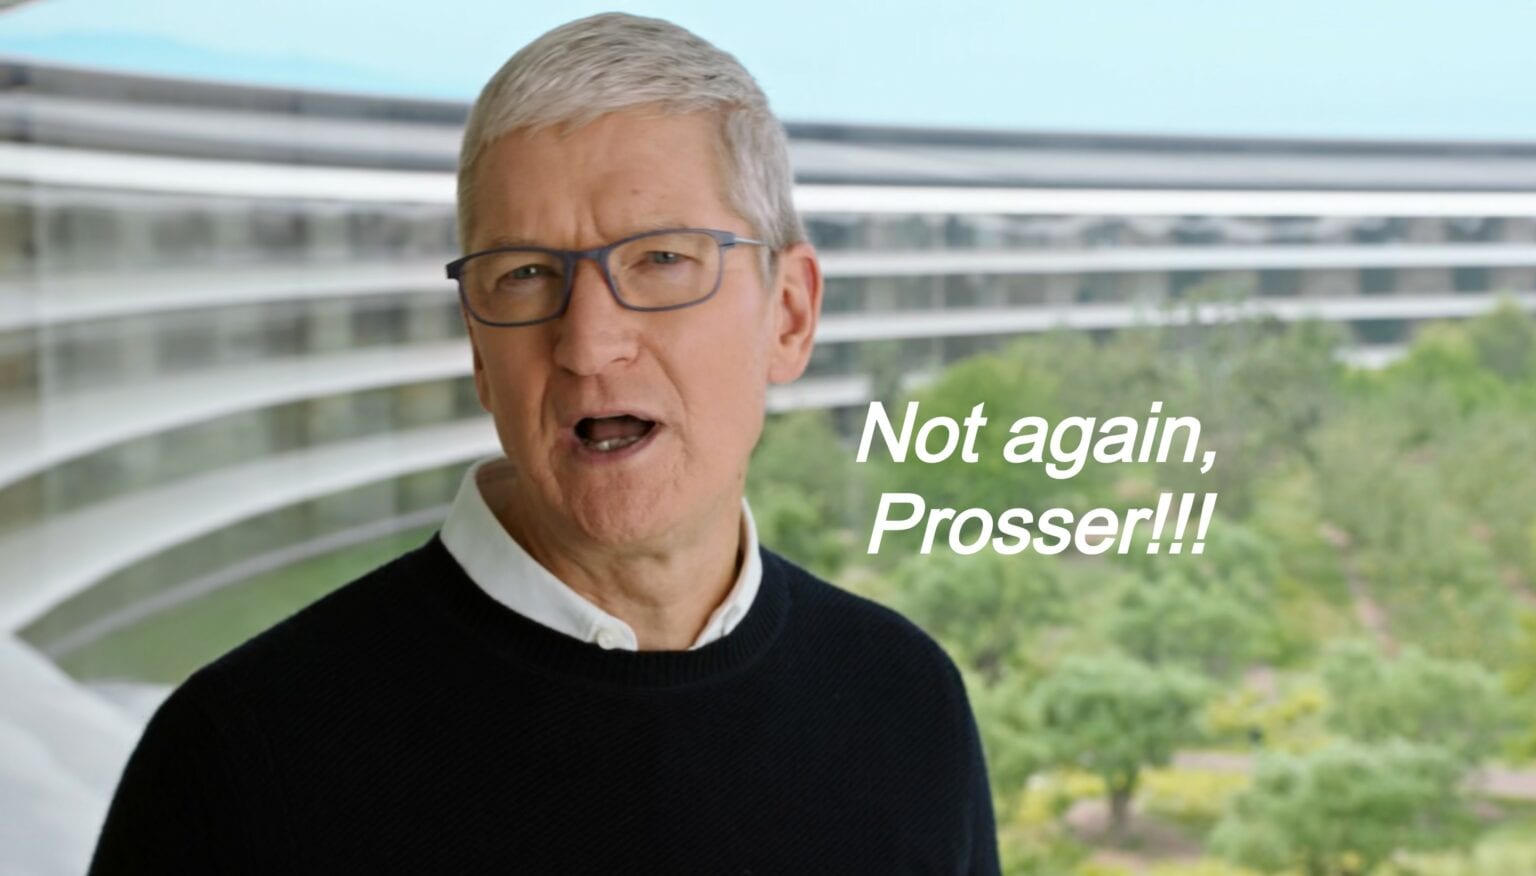 Tim Cook can't be happy about Jon Prosser's latest hits.